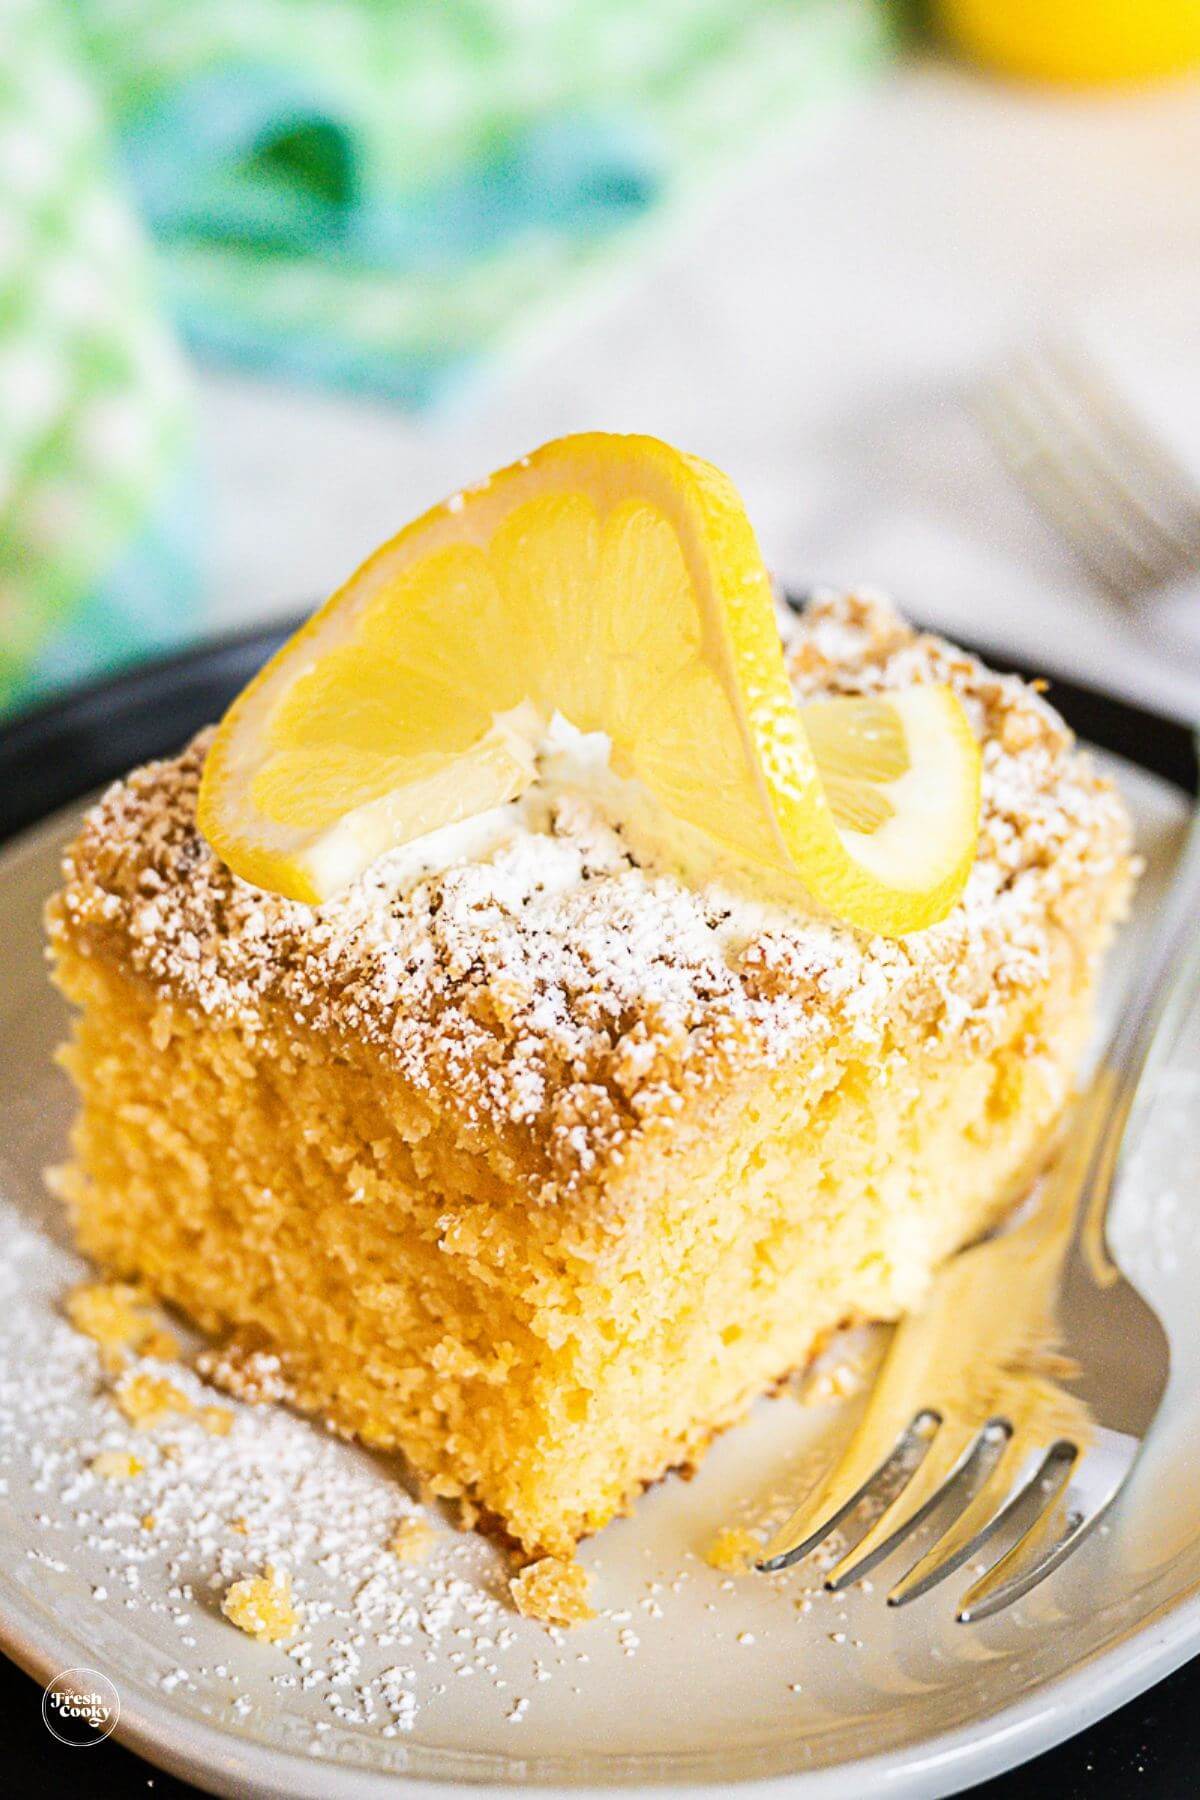 Large slice of lemon coffee cake with streusel topping and dusting of powdered sugar on plate.